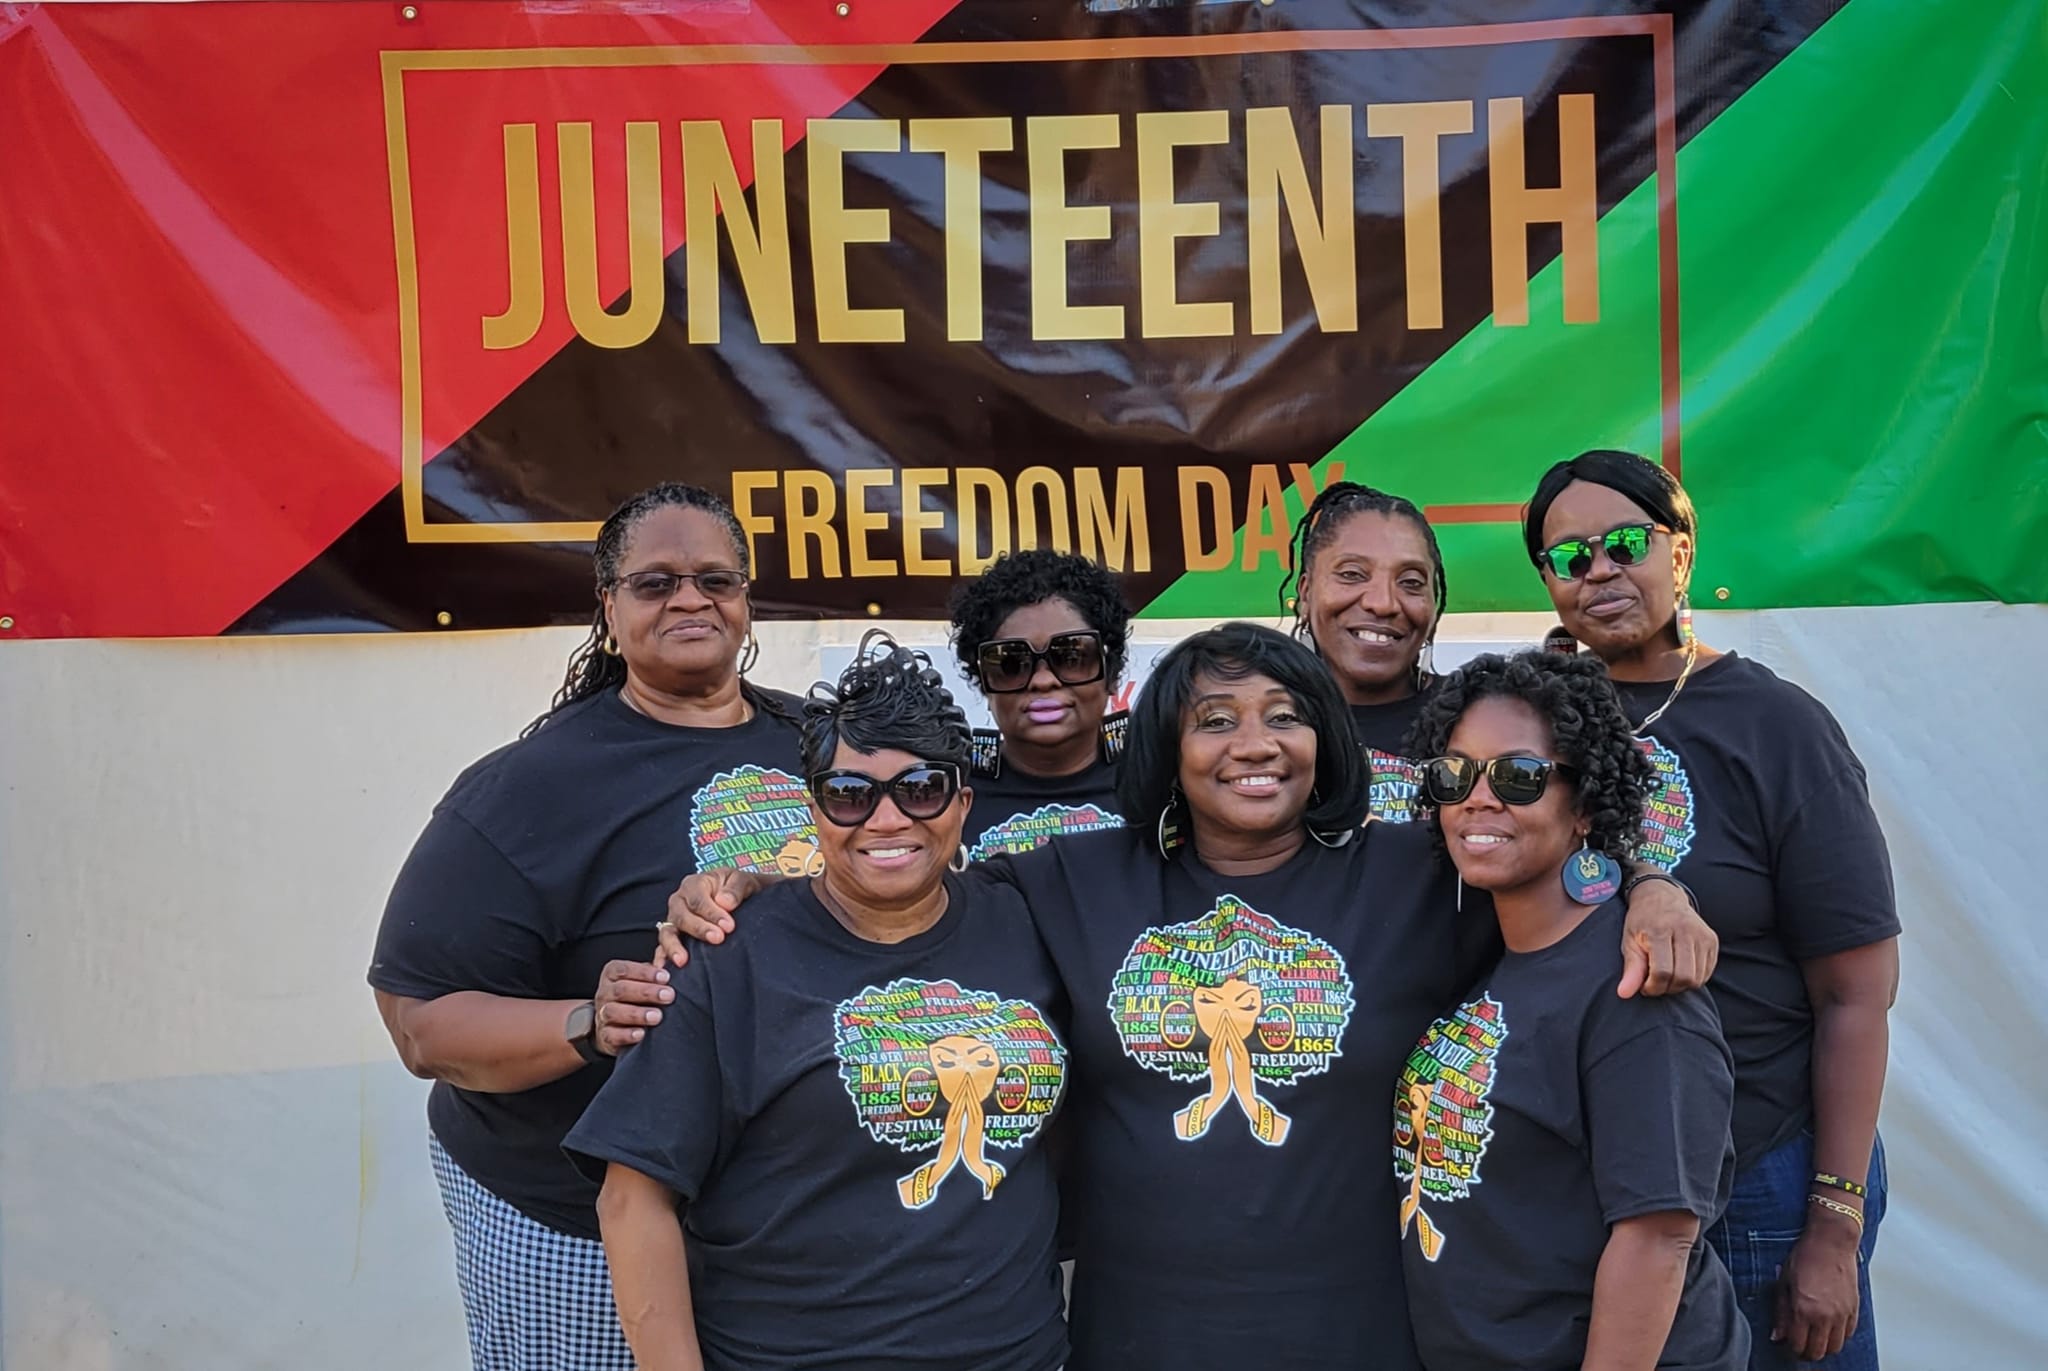 Click the Celebrating Freedom and Heritage: Juneteenth in Ottumwa slide photo to open